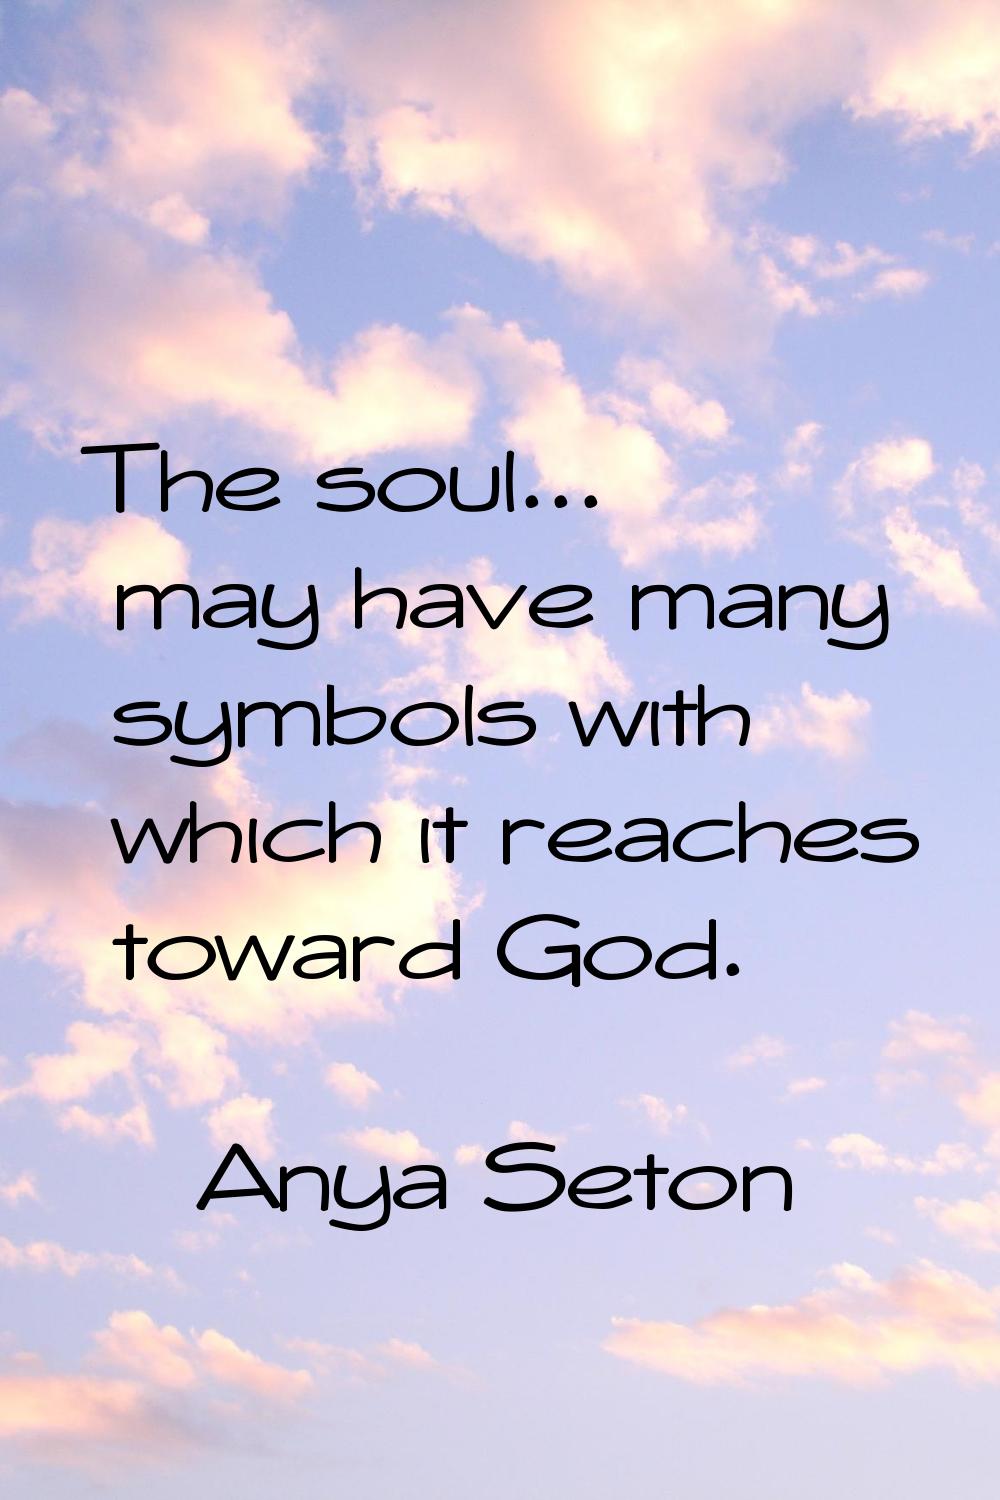 The soul... may have many symbols with which it reaches toward God.